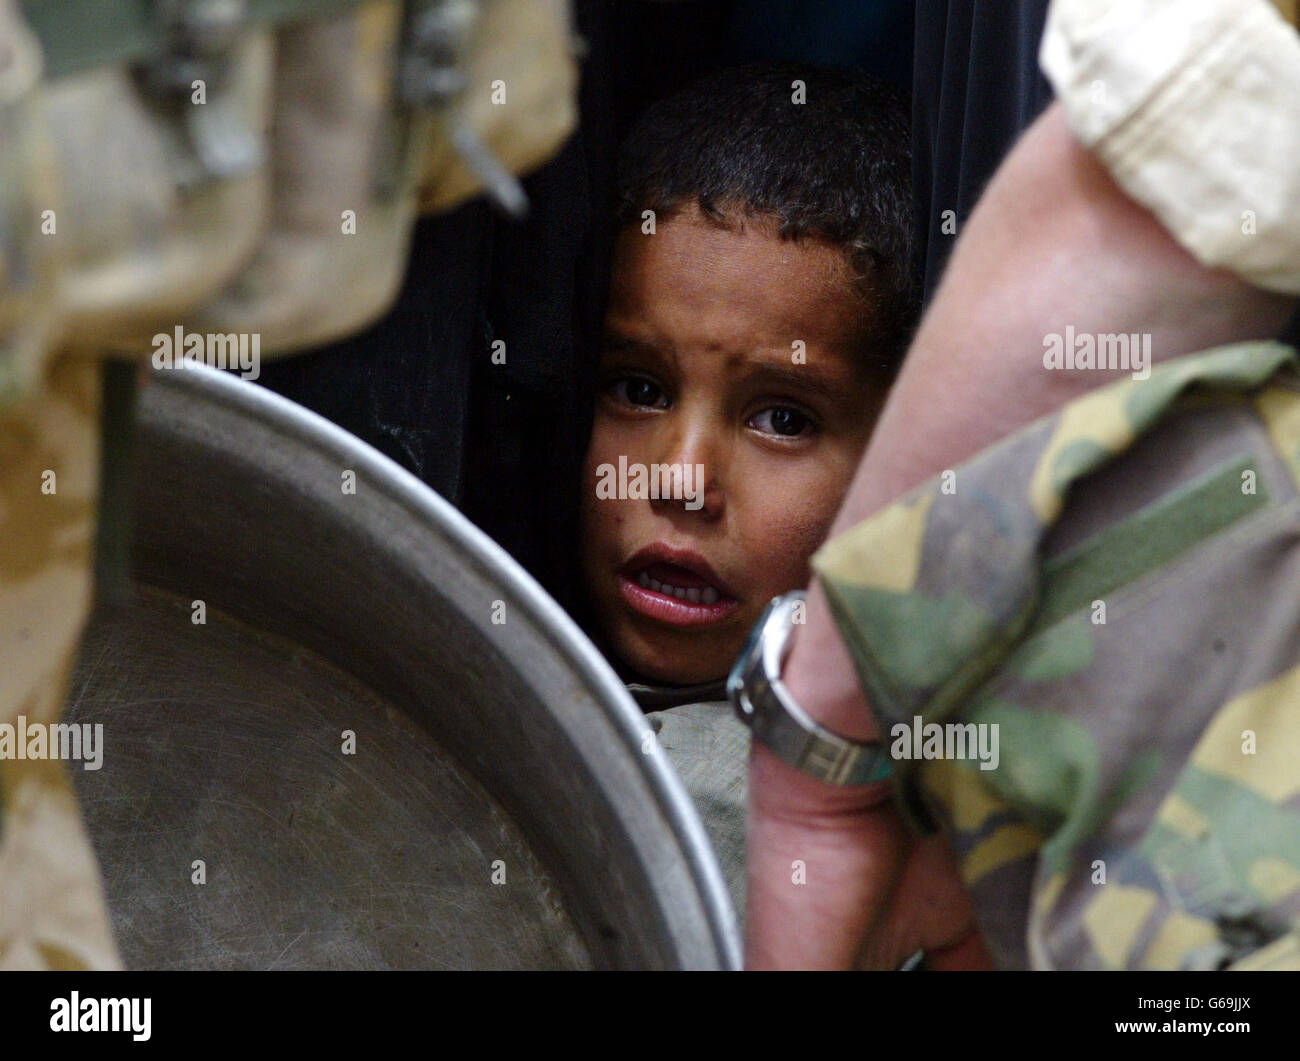 A young Iraqi child waits his turn for water as British soldiers from the 23 Pioneer Regiment hand out fresh water from a tanker in the southern Iraqi town of Safwan. The British forces are helping the local people with humanitarian aid. Stock Photo